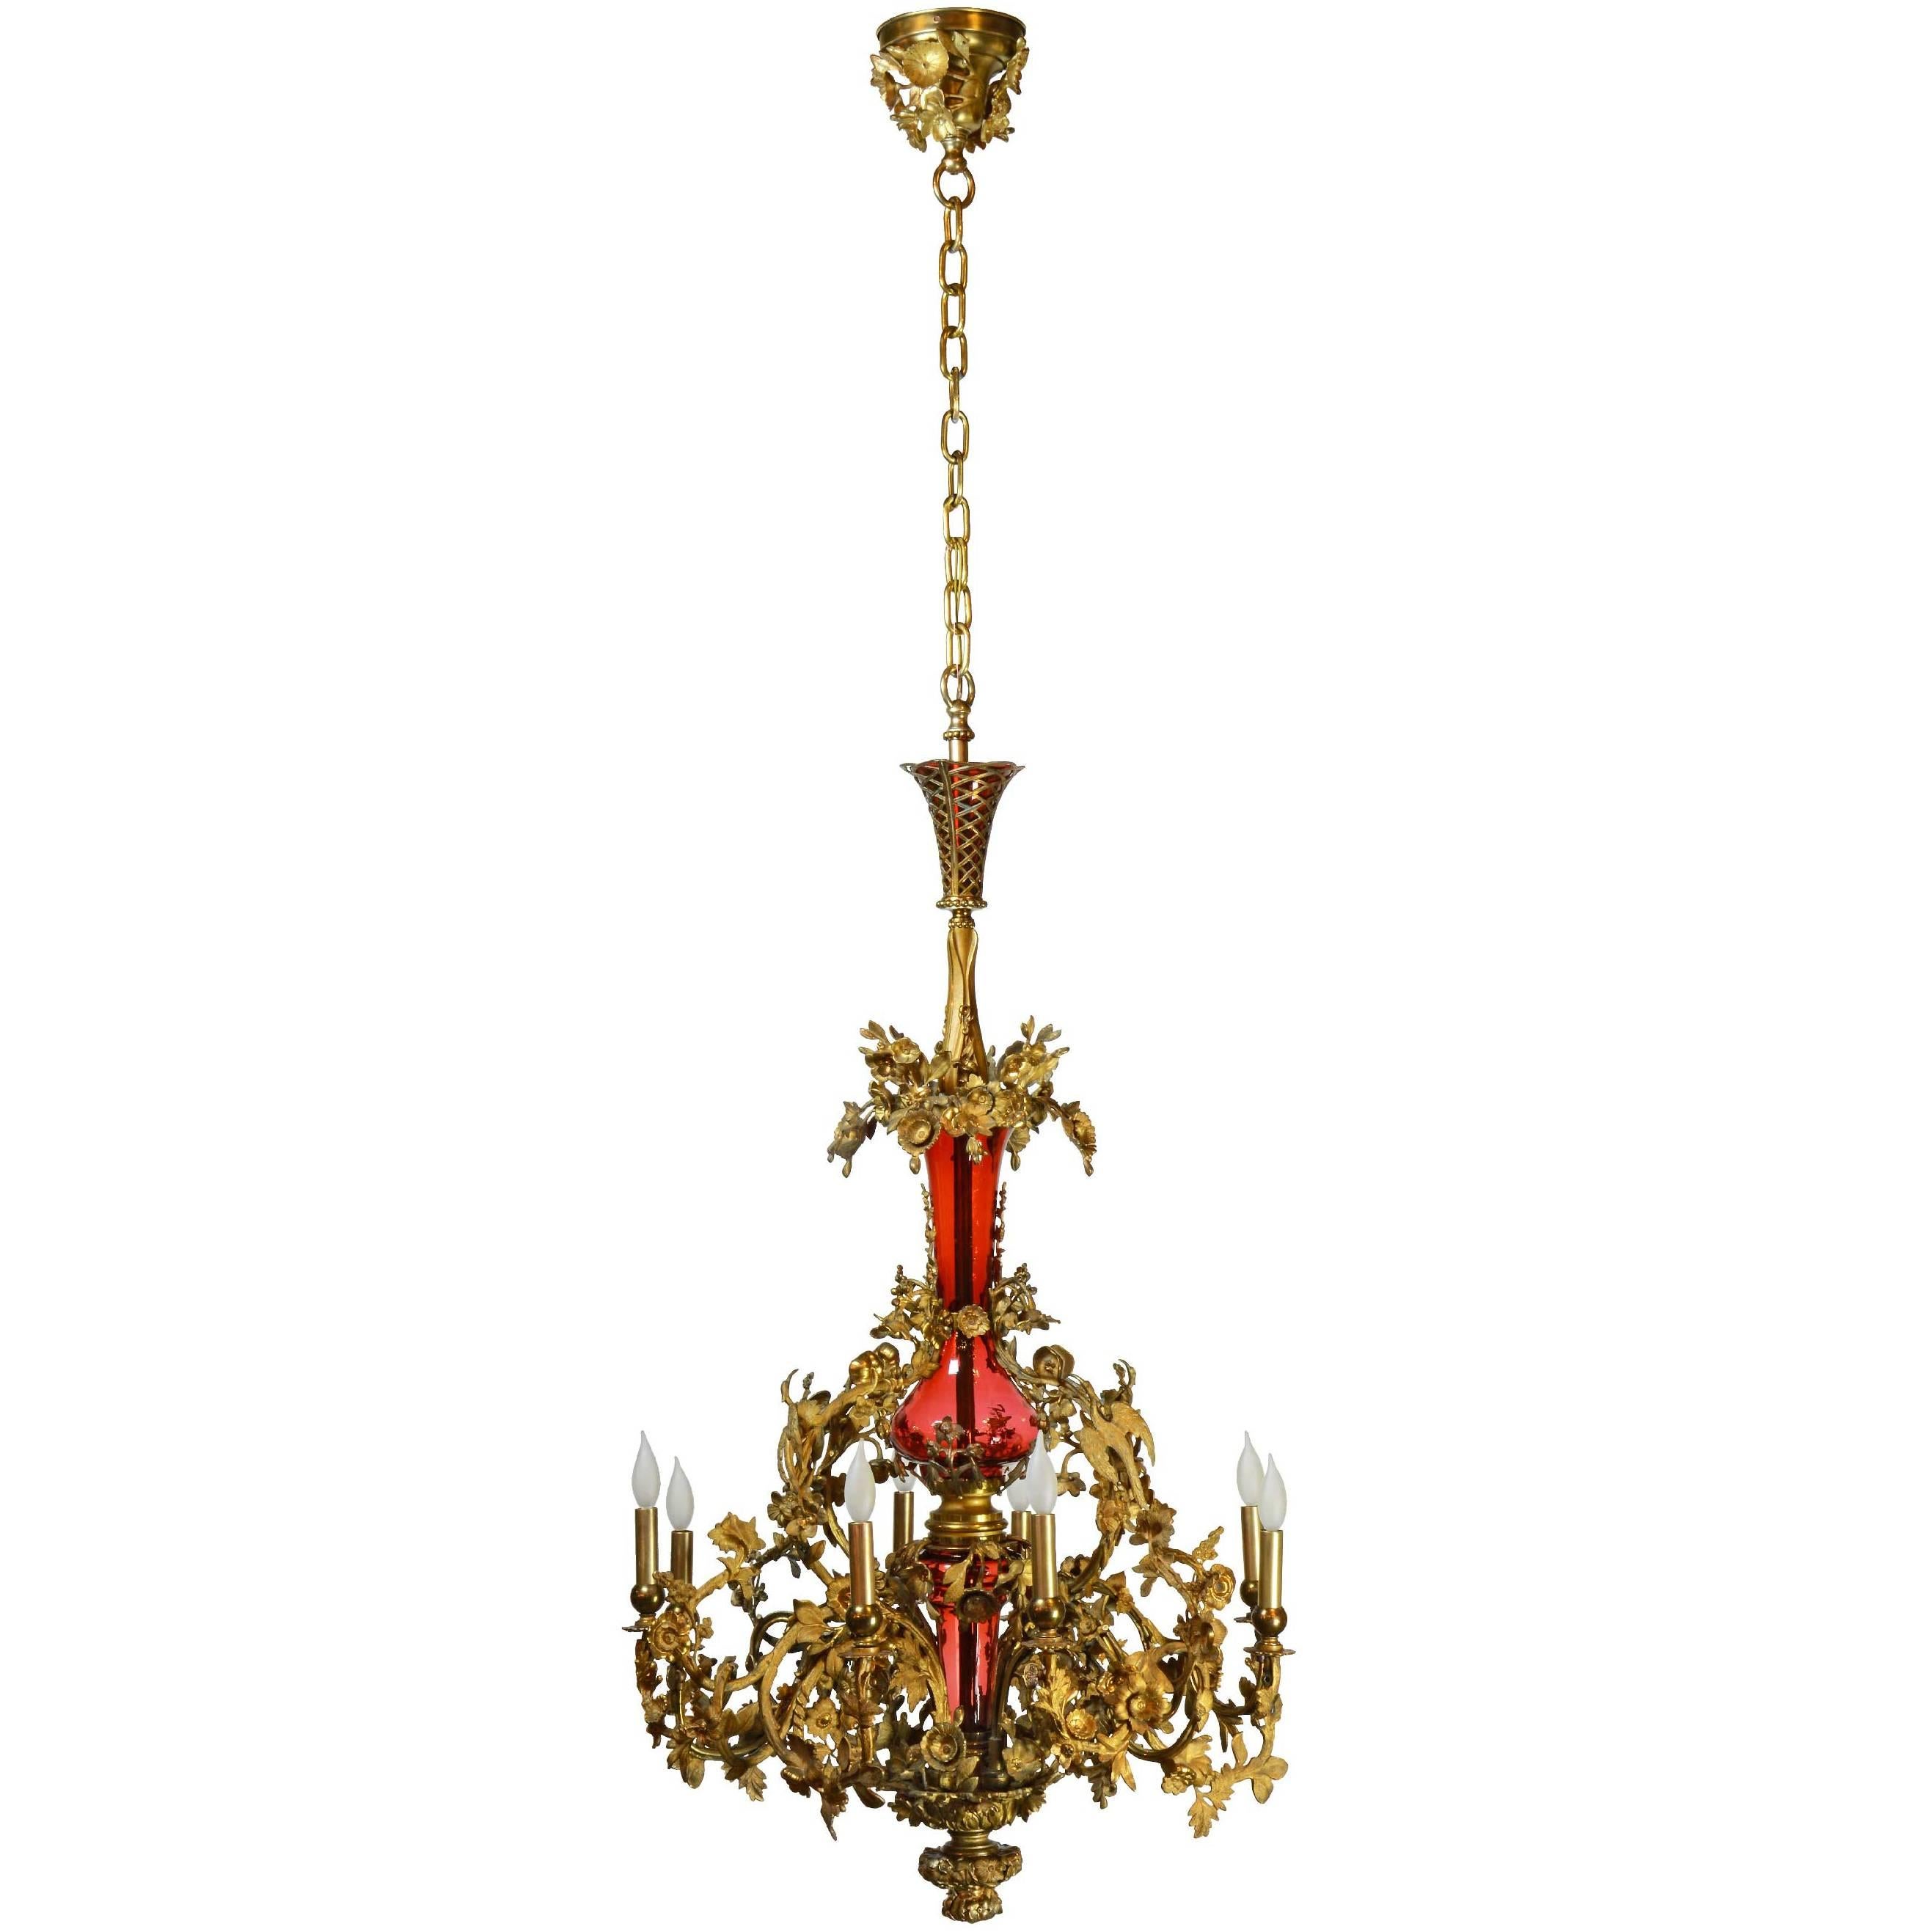 Ornate Brass and Cranberry Glass Converted Gas Fixture, circa 1880 For Sale